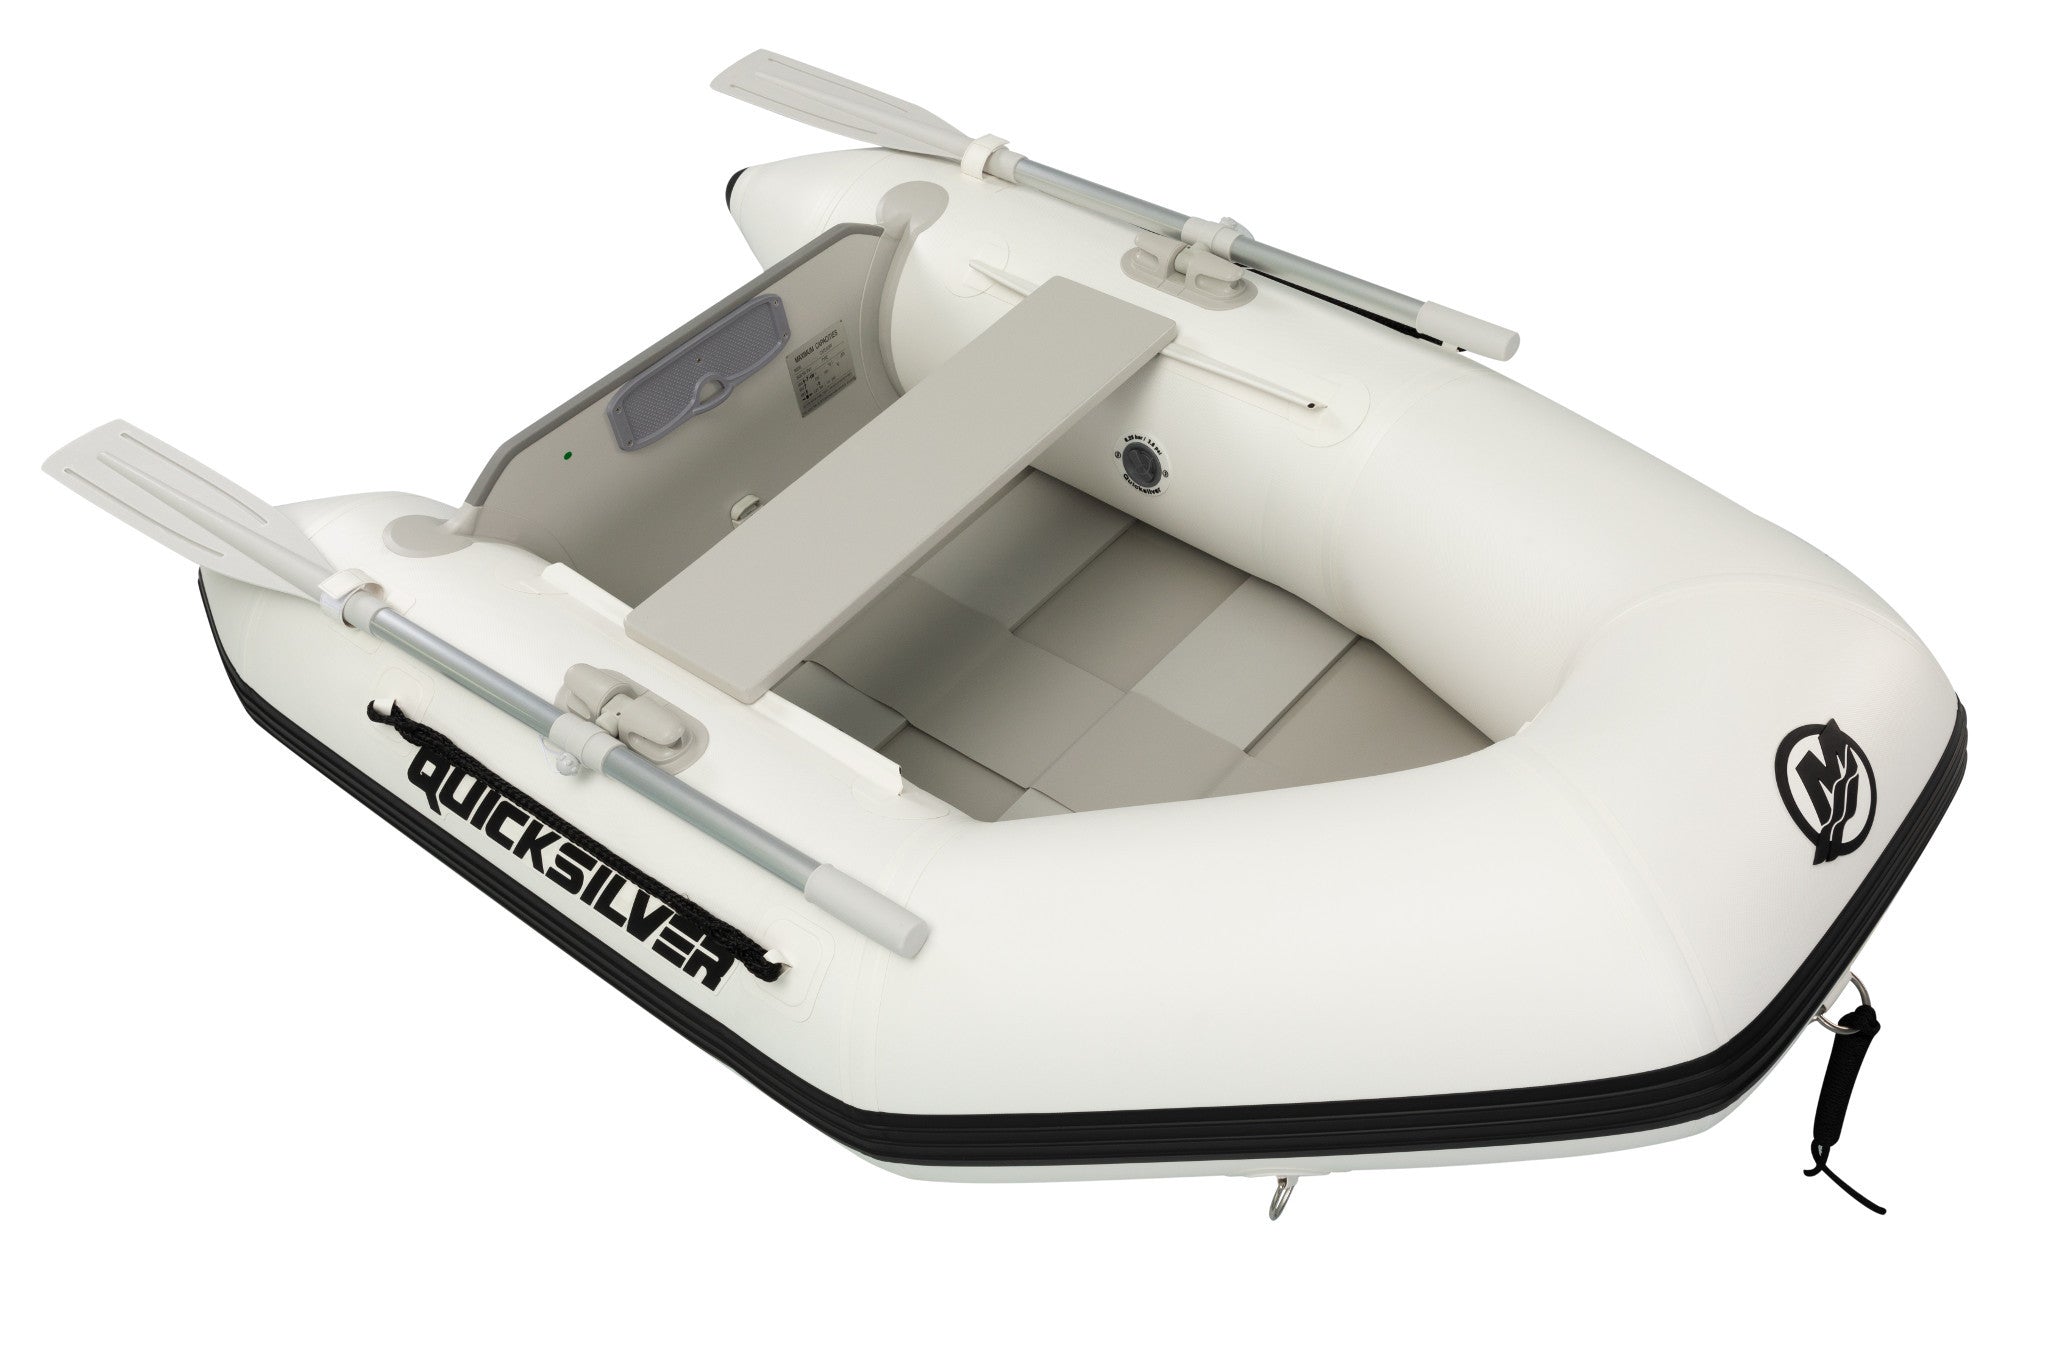 TENDY 200/240 Quicksilver Inflatable Boat